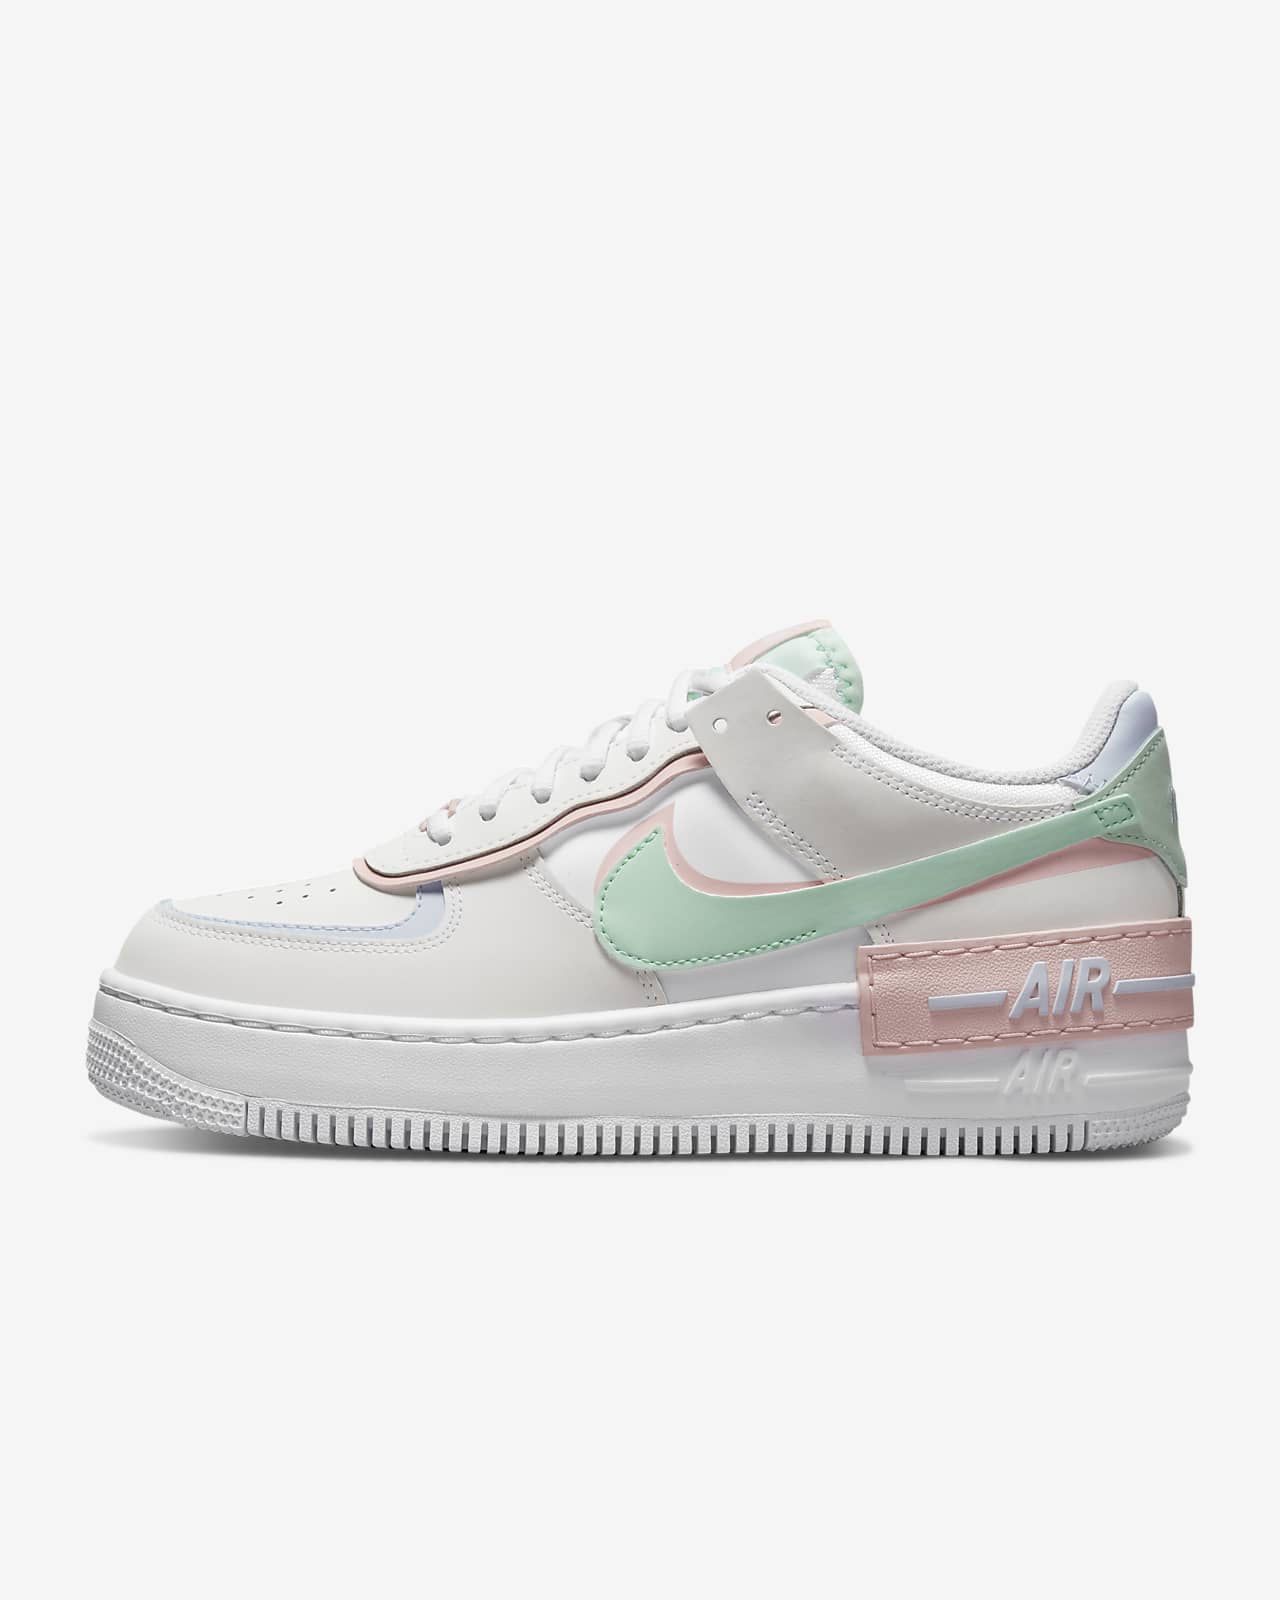 nike air force 1 chaussures femme